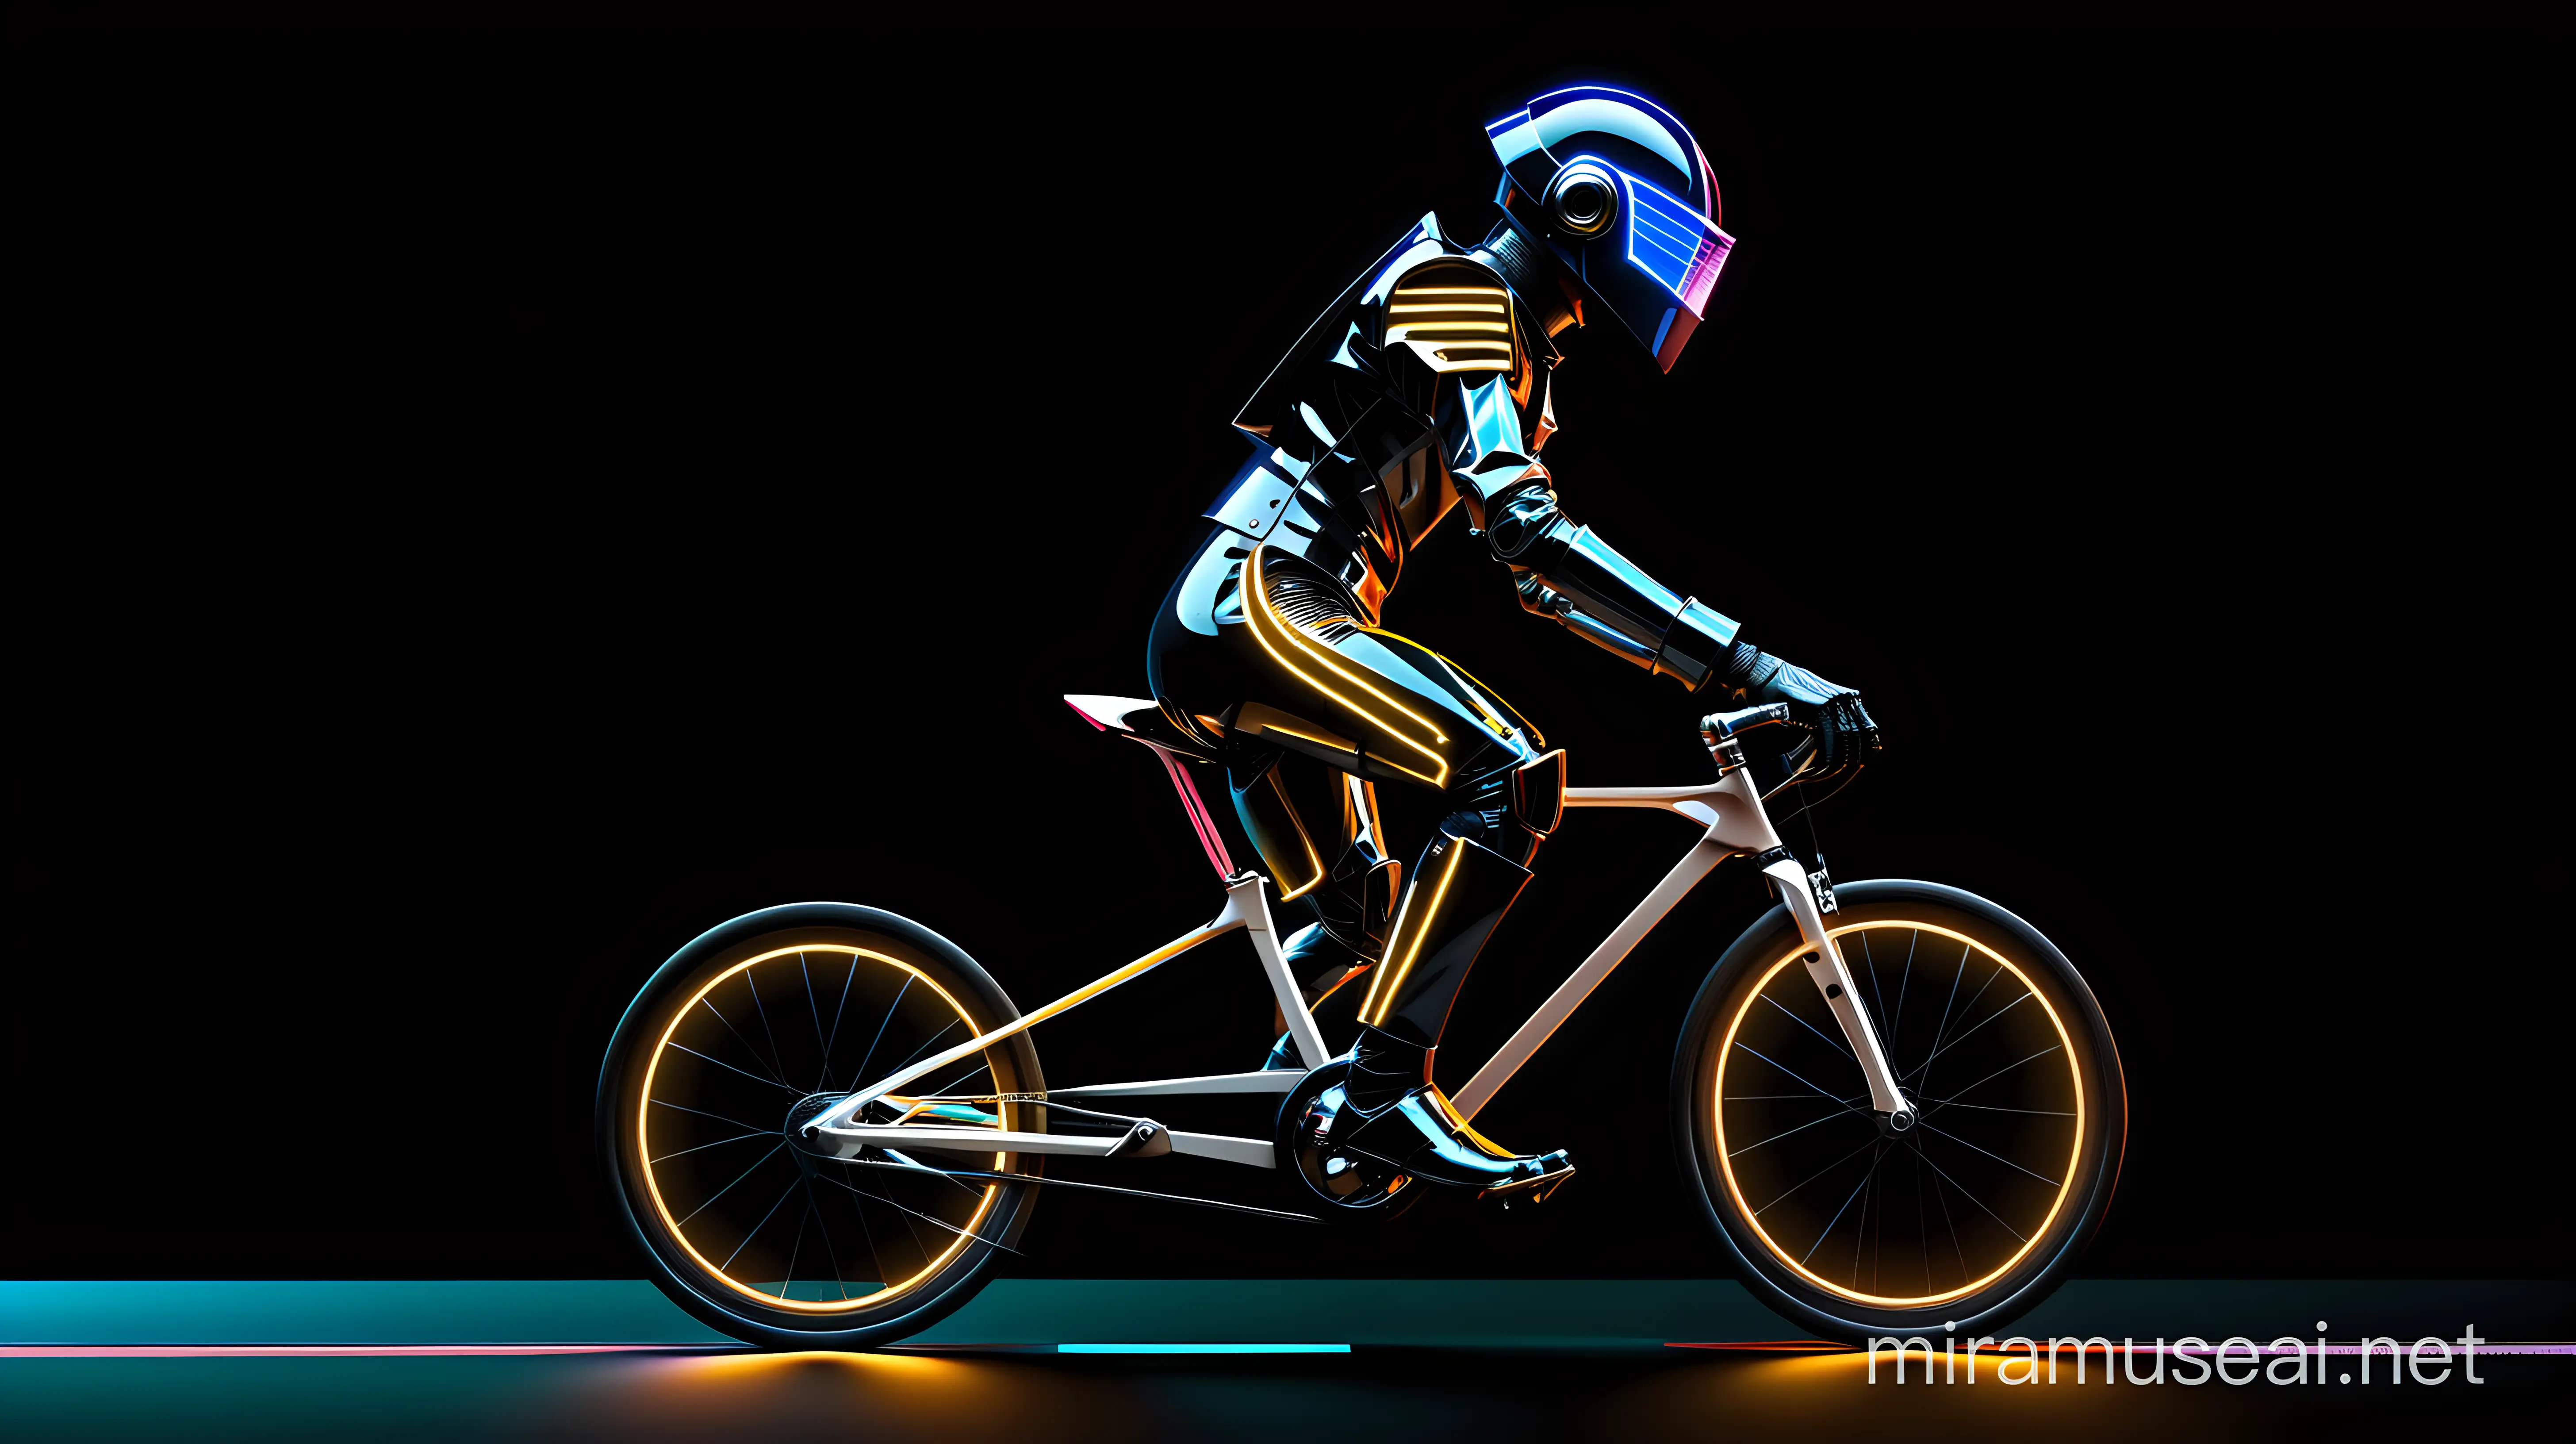 A very fast futuristic track cyclist dressed as a daft punk robot with neon lines against a black background, he is cycling very fast, side on shot show the whole bicycle and person in the shot 